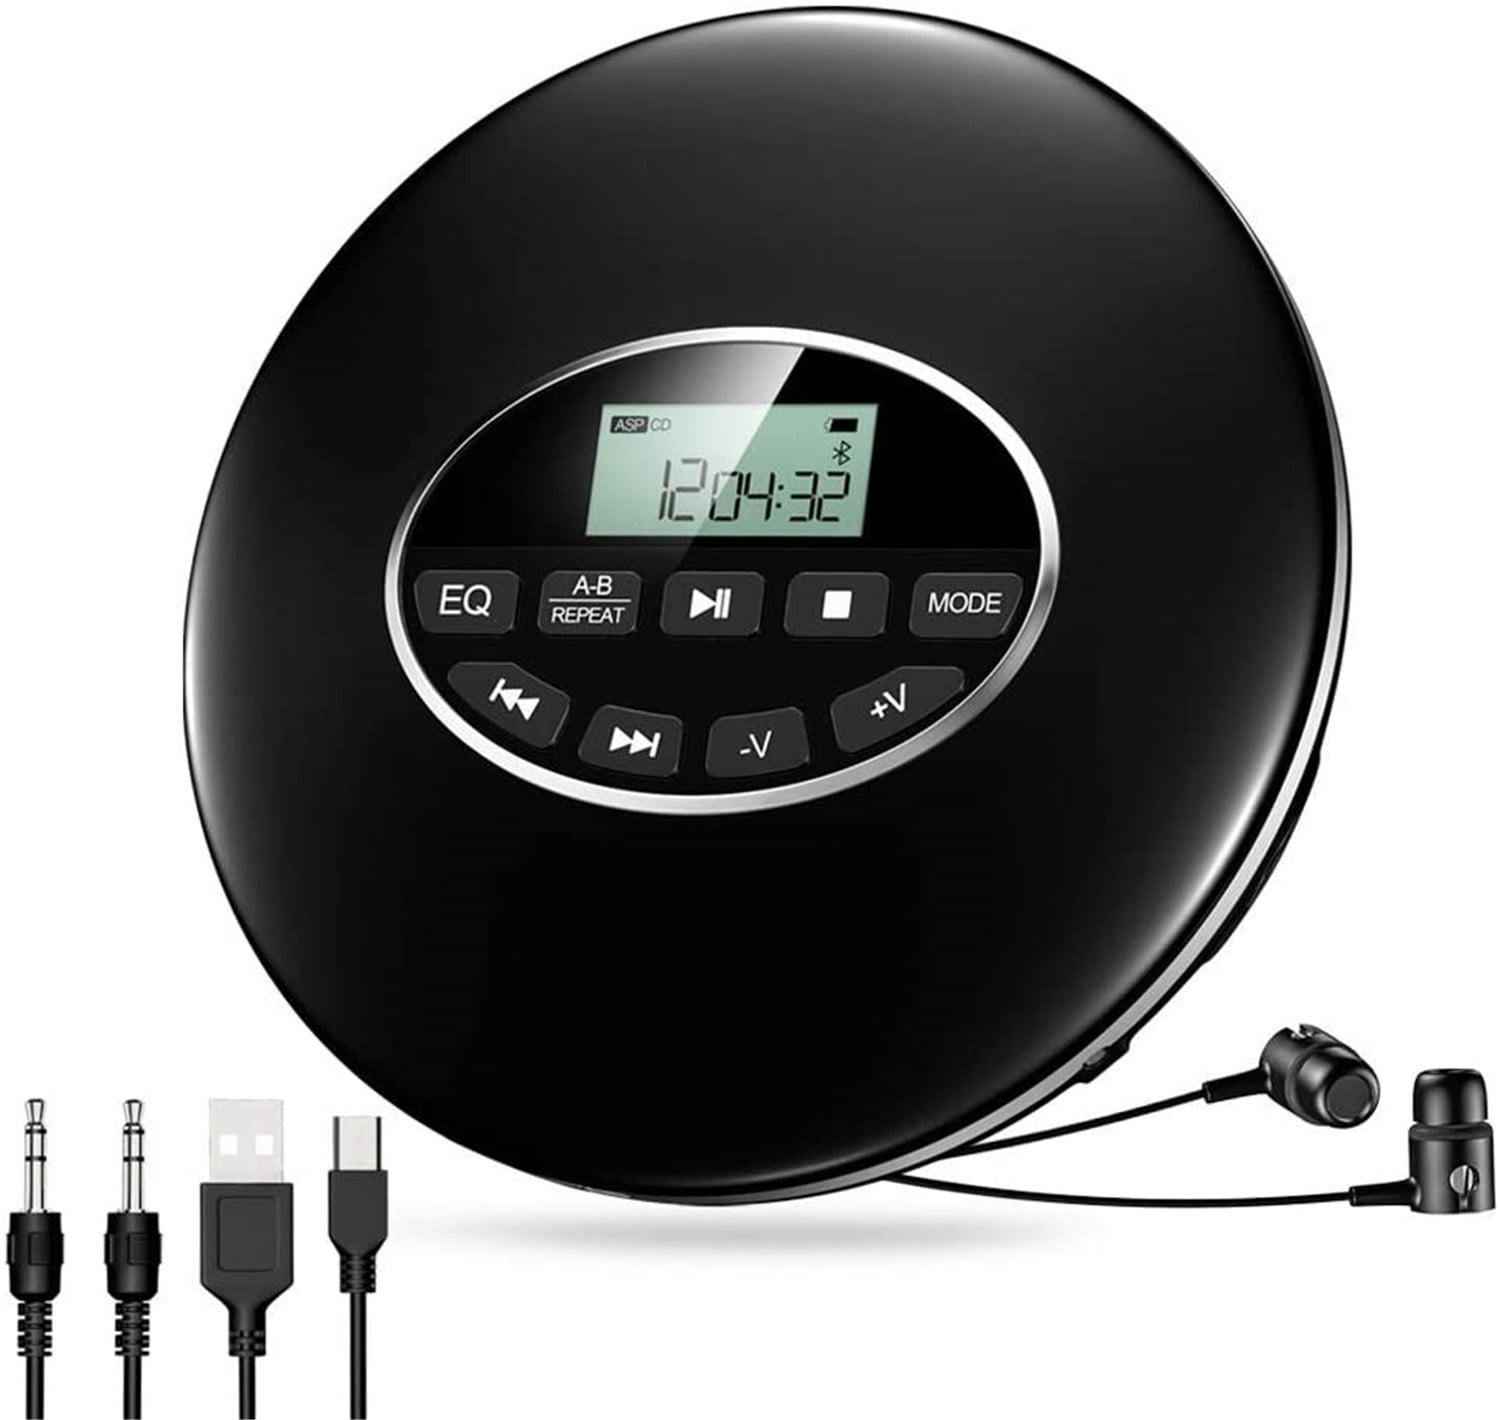 Personal Compact CD Player with Stereo Earbuds/USB Power Cable/LCD Display Portable CD Player for Car Anti-Skip Small CD Player Black CD Music Player with Anti-Shock Function 